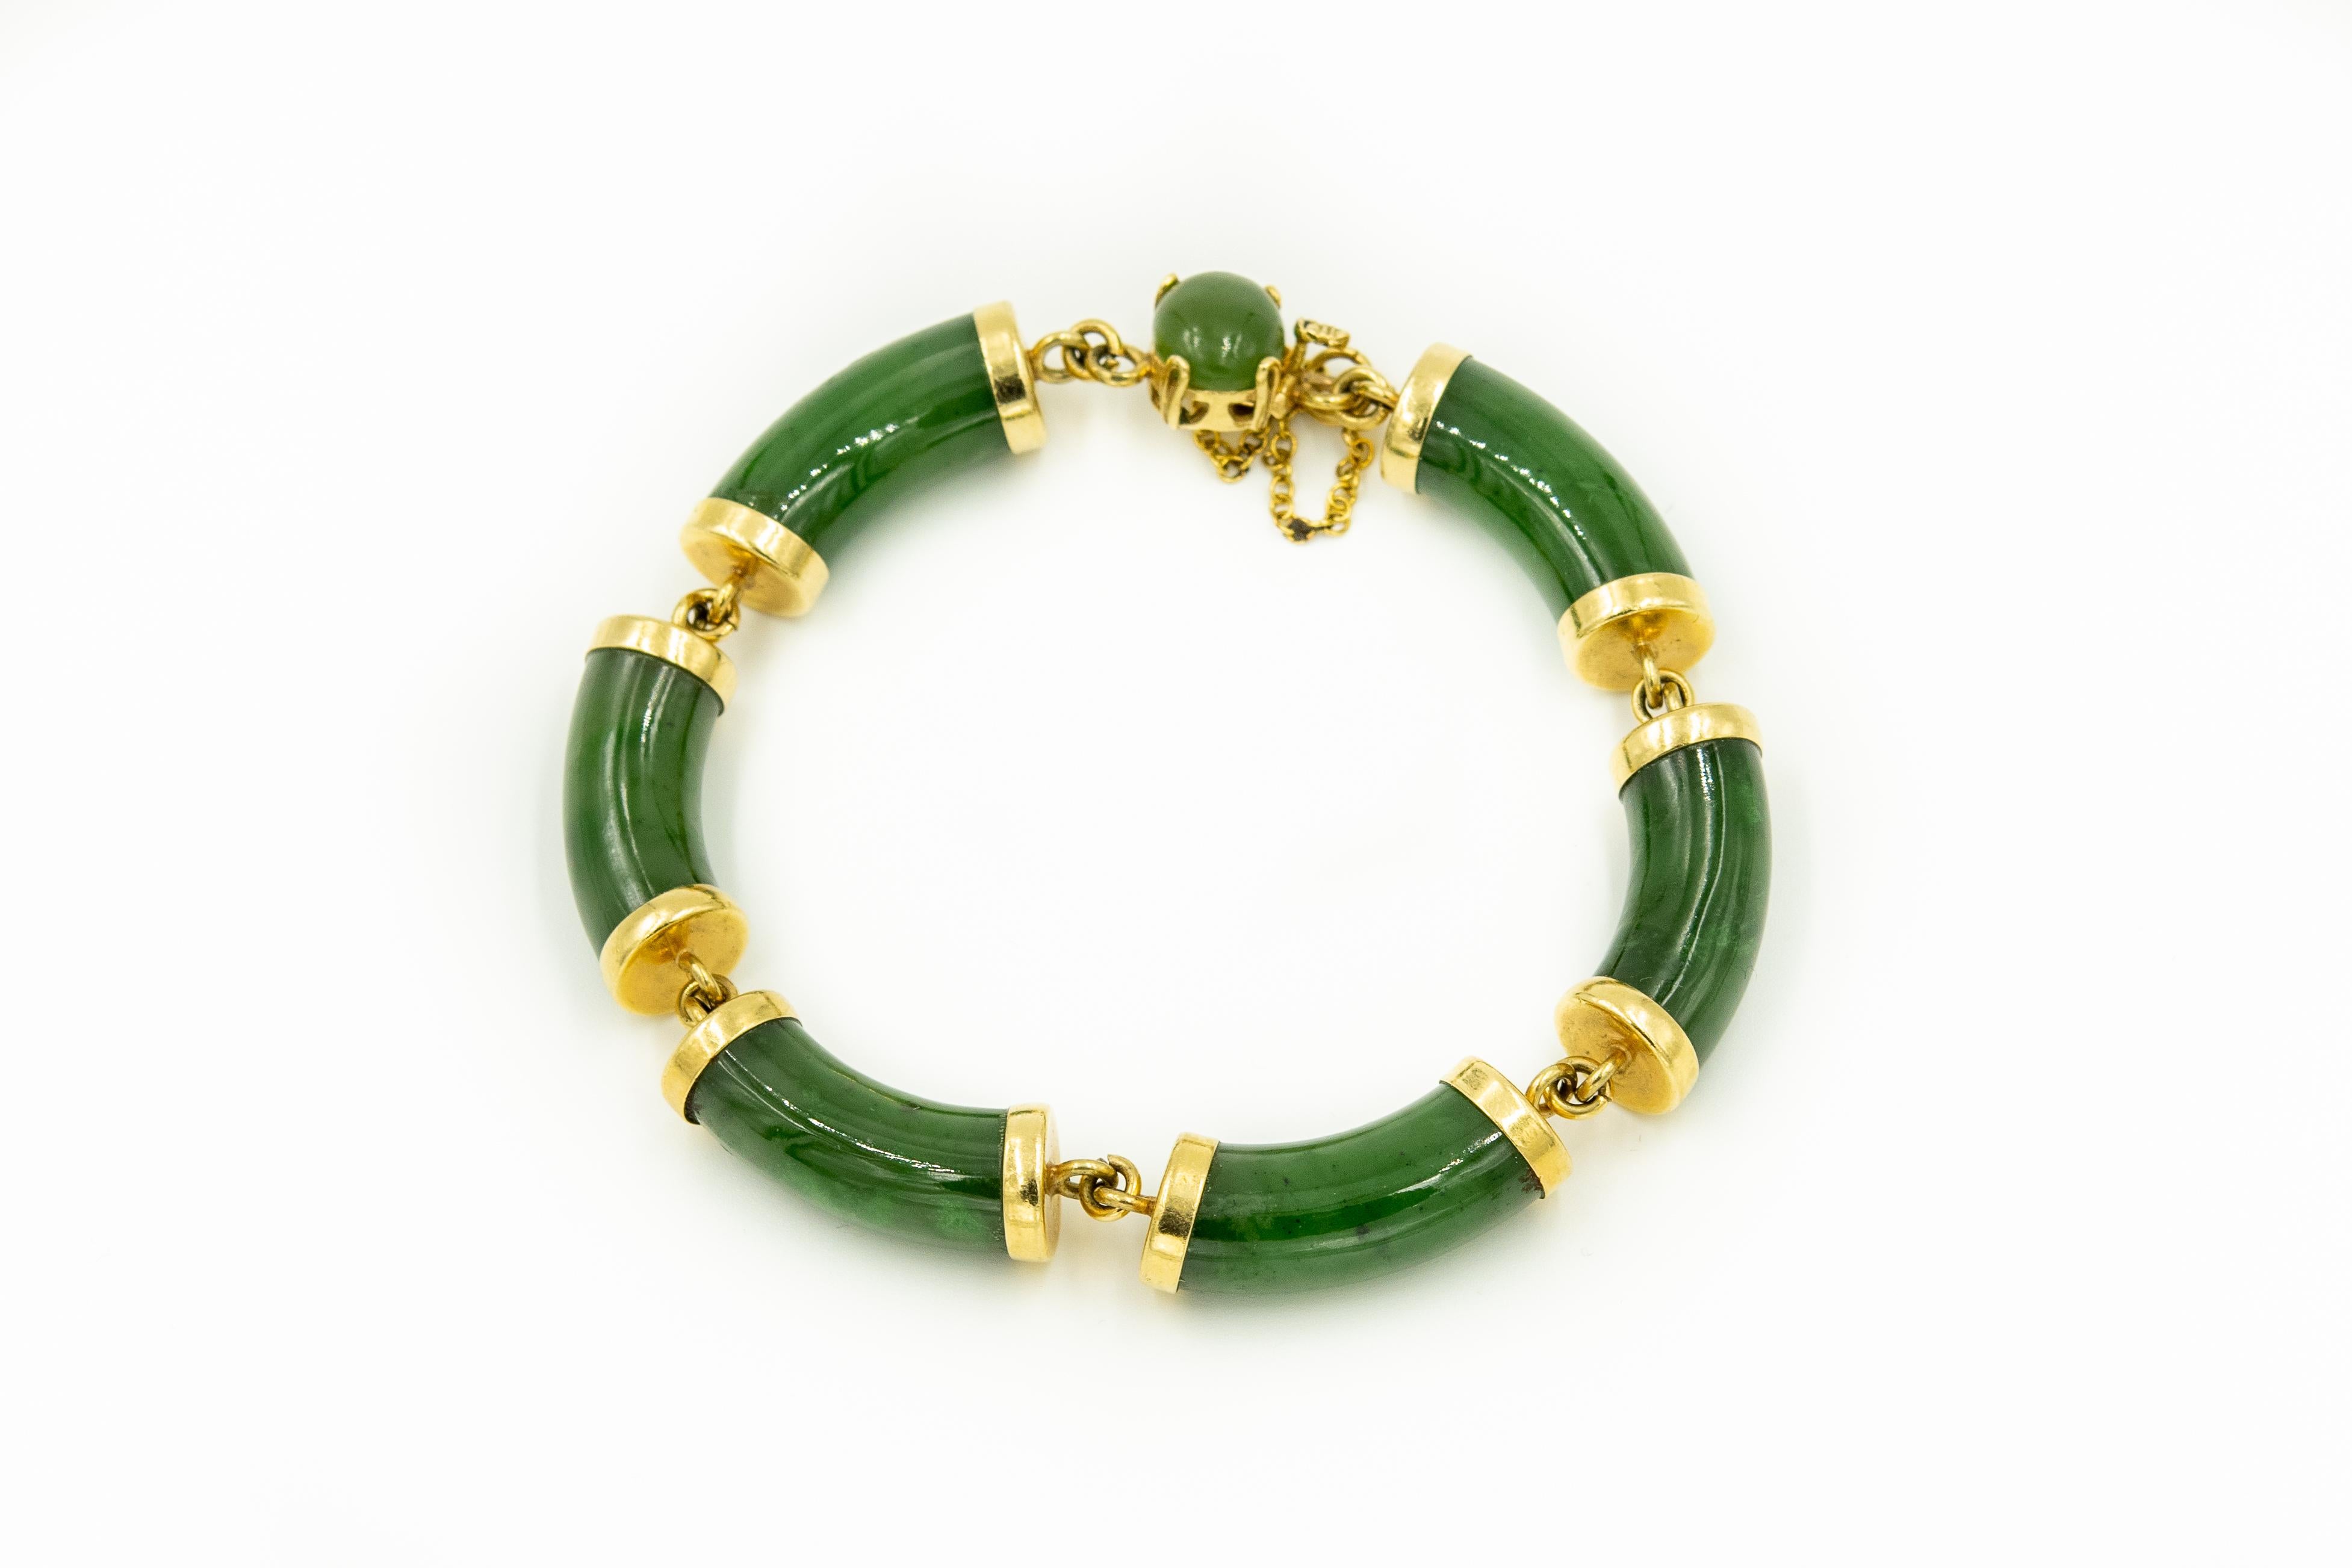 Chinese 14k yellow gold bracelet featuring nephrite jade bamboo bars with gold caps and matching clasp with an oval cabochon piece of jade on top of a 14k push button clasp.  The bracelet has an additional safety chain clasp bracelet.